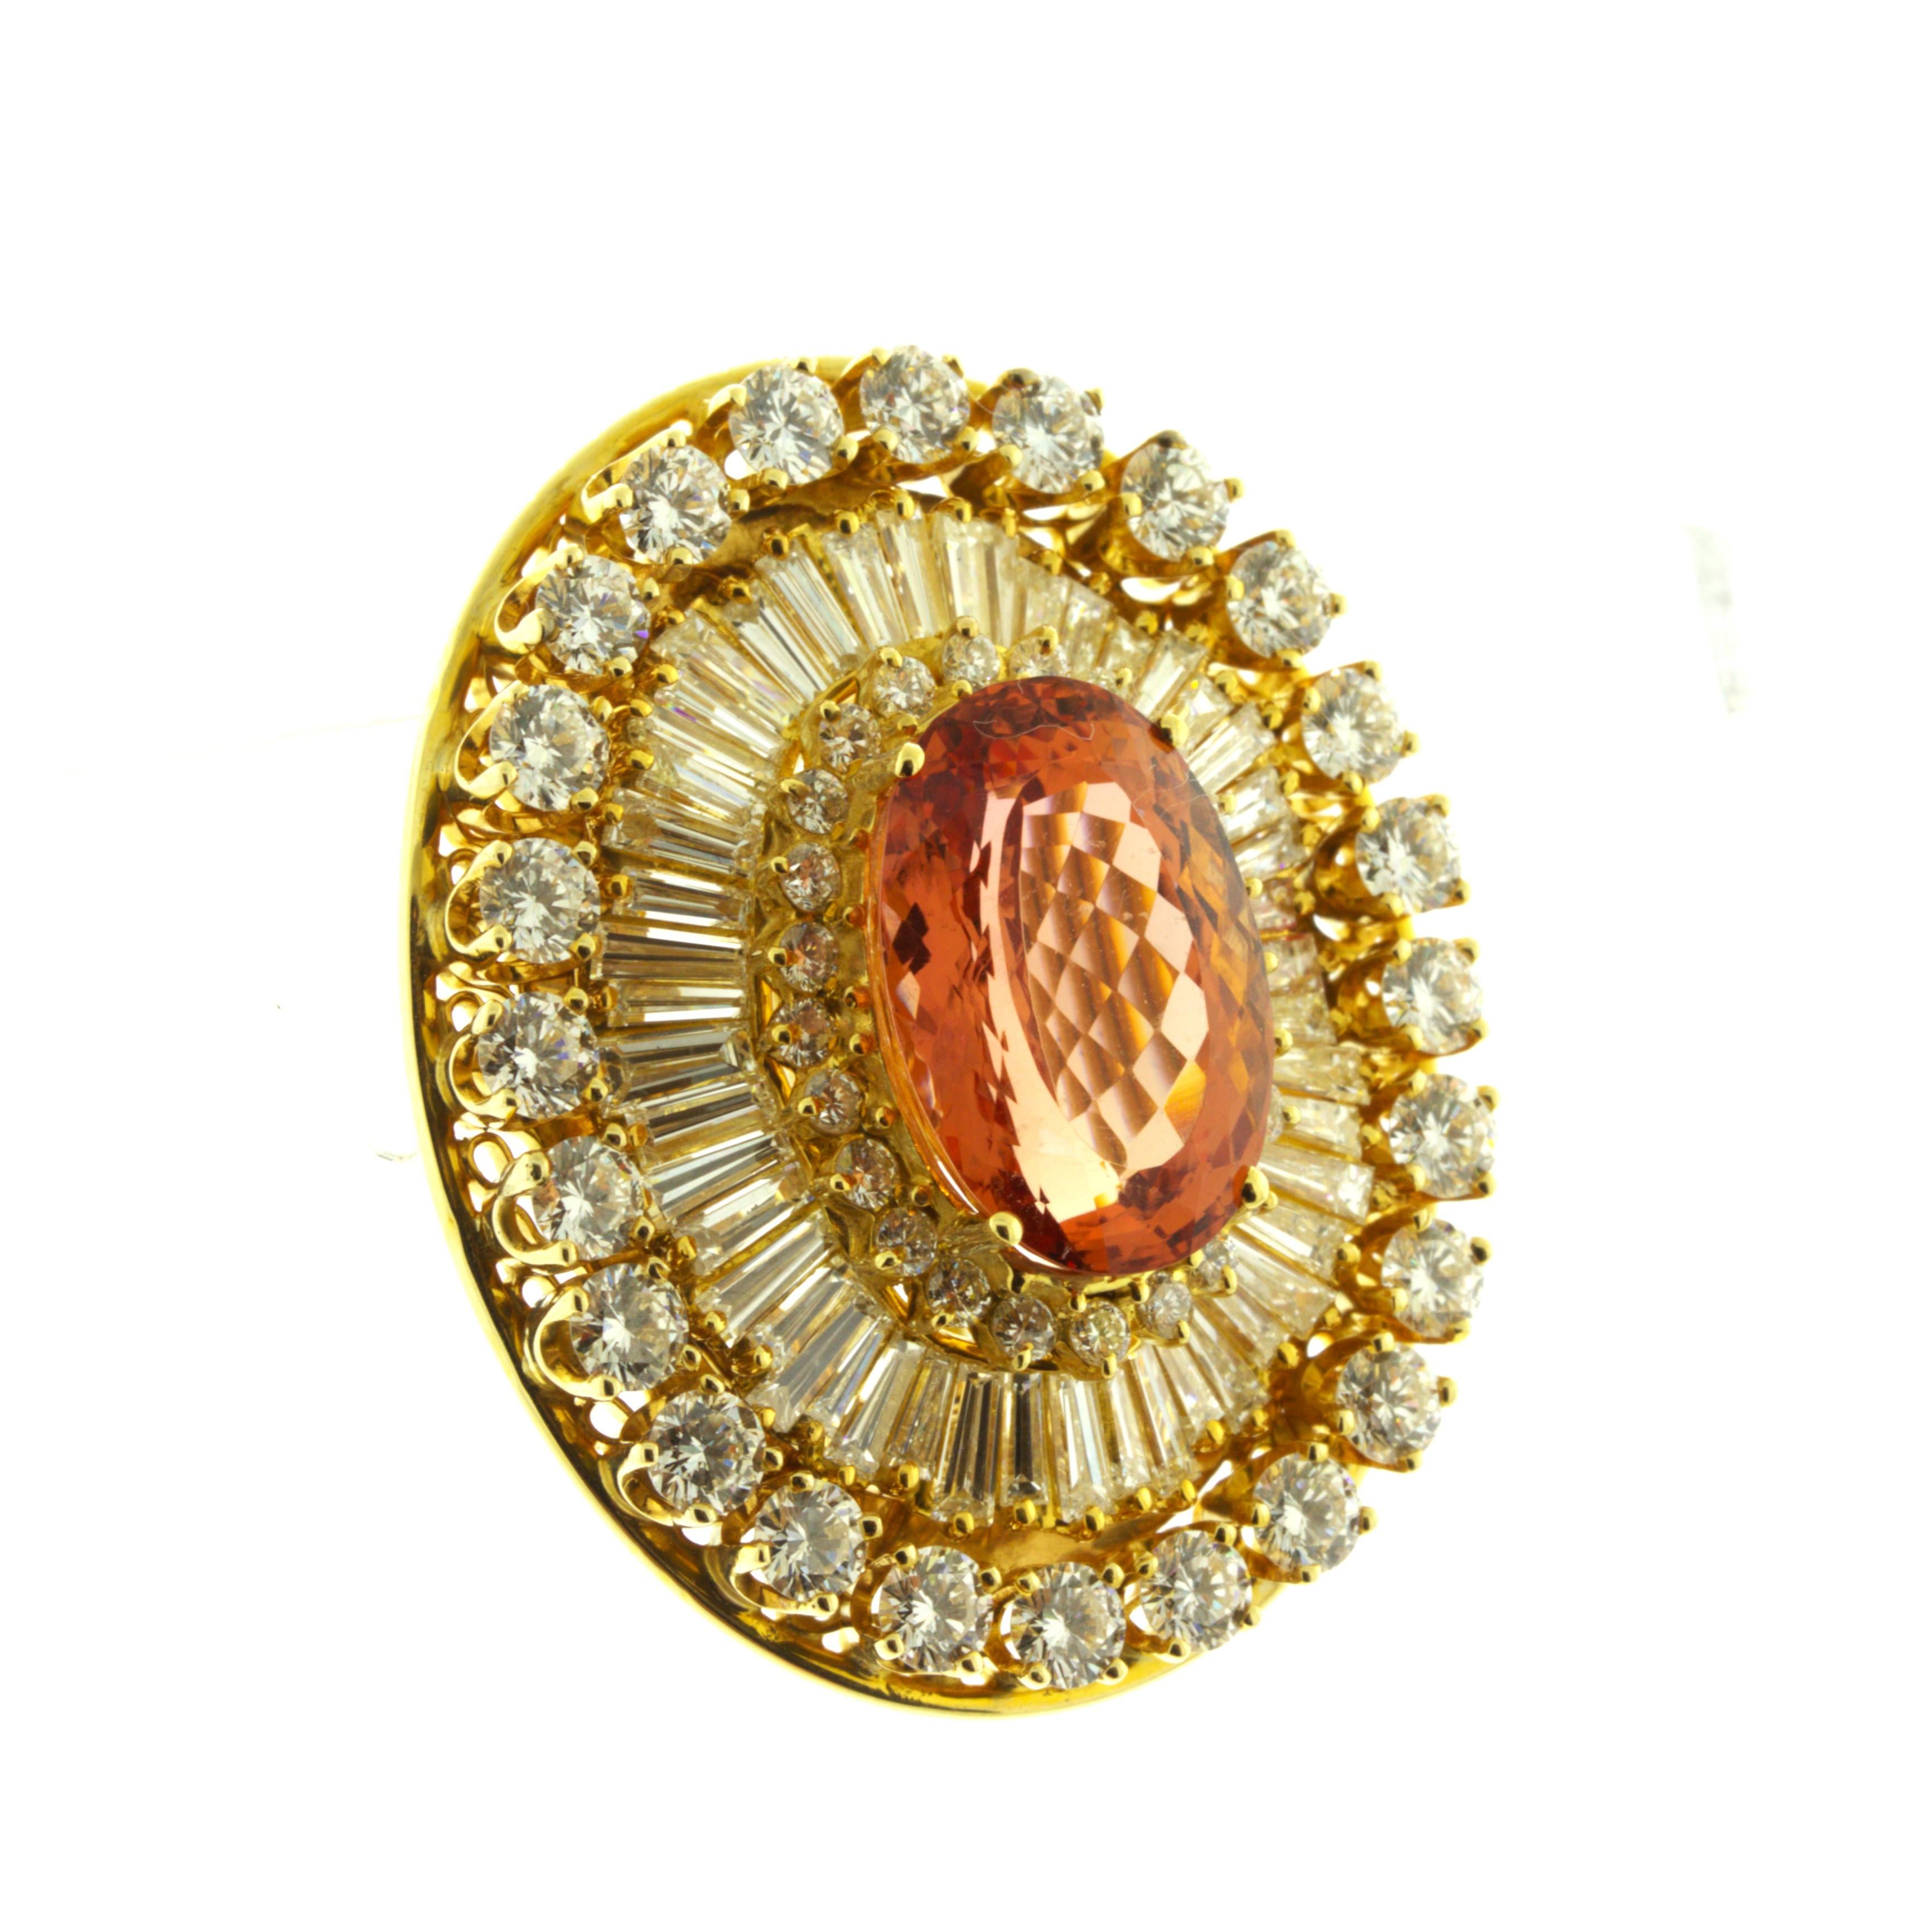 Superb Imperial Topaz Diamond 18K Yellow Gold Brooch, AGL Certified For Sale 2